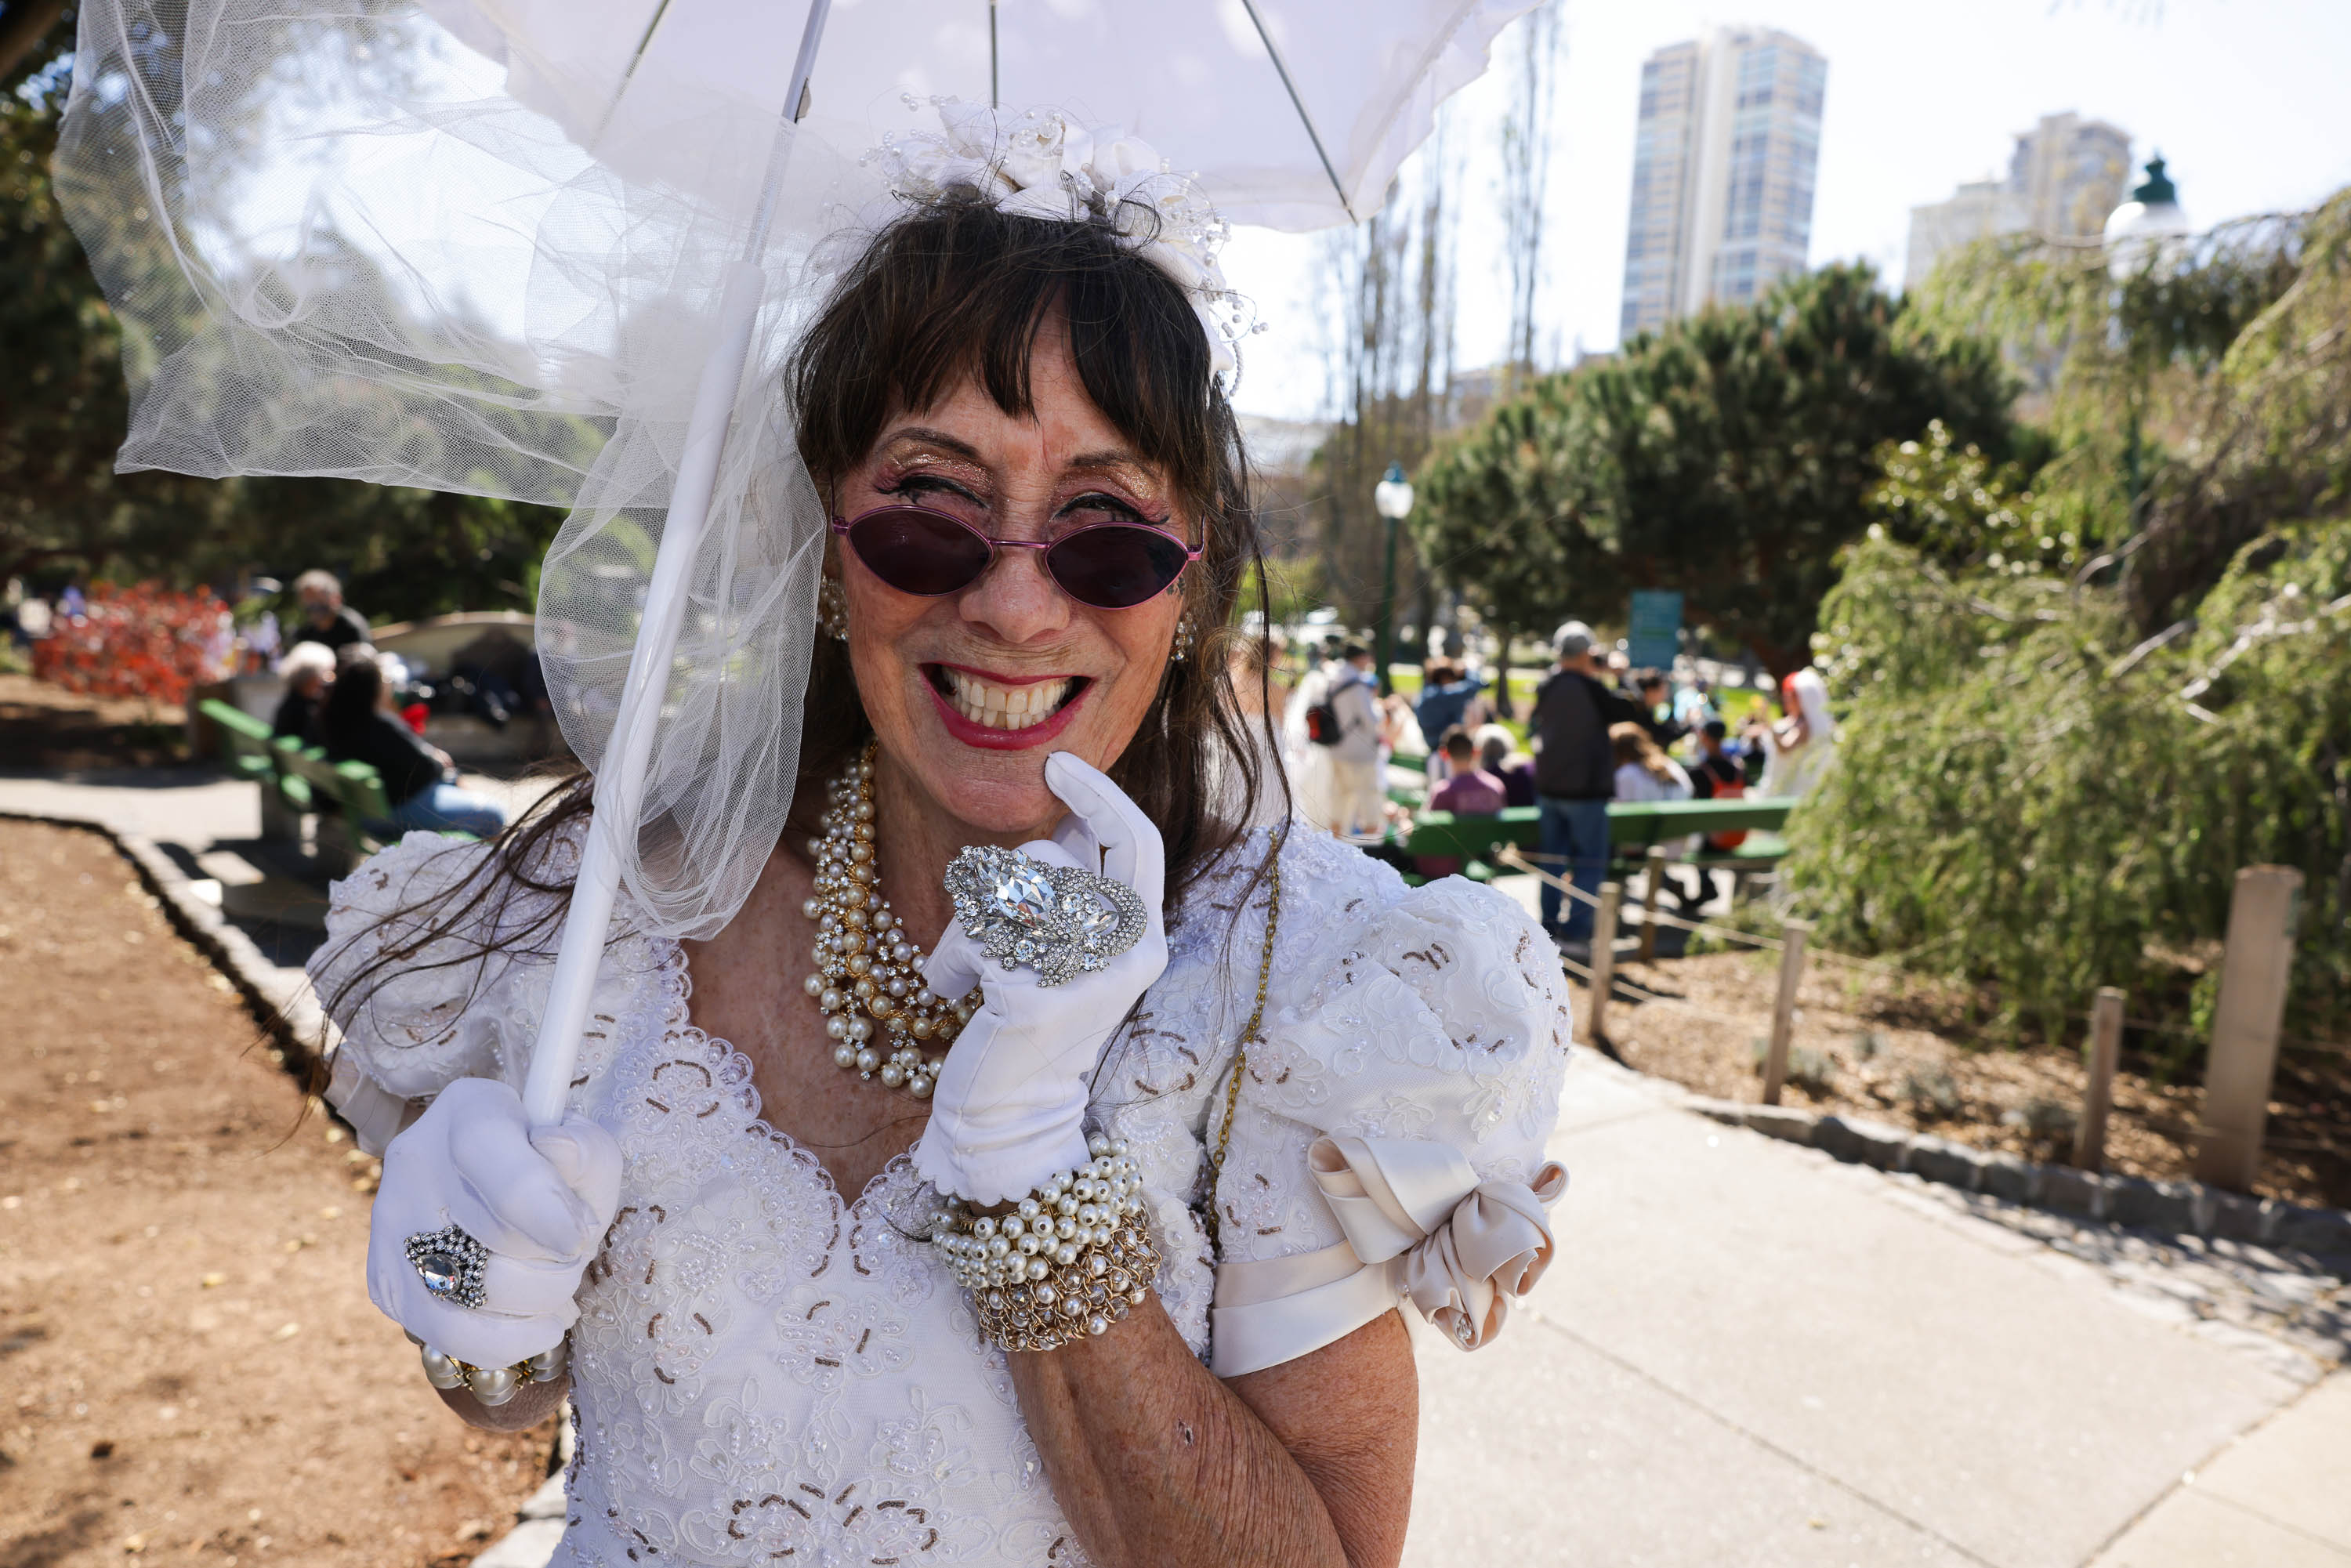 A smiling woman in a white bridal outfit wears sunglasses and pearls and holds an umbrella in an outdoor setting with people in the background.